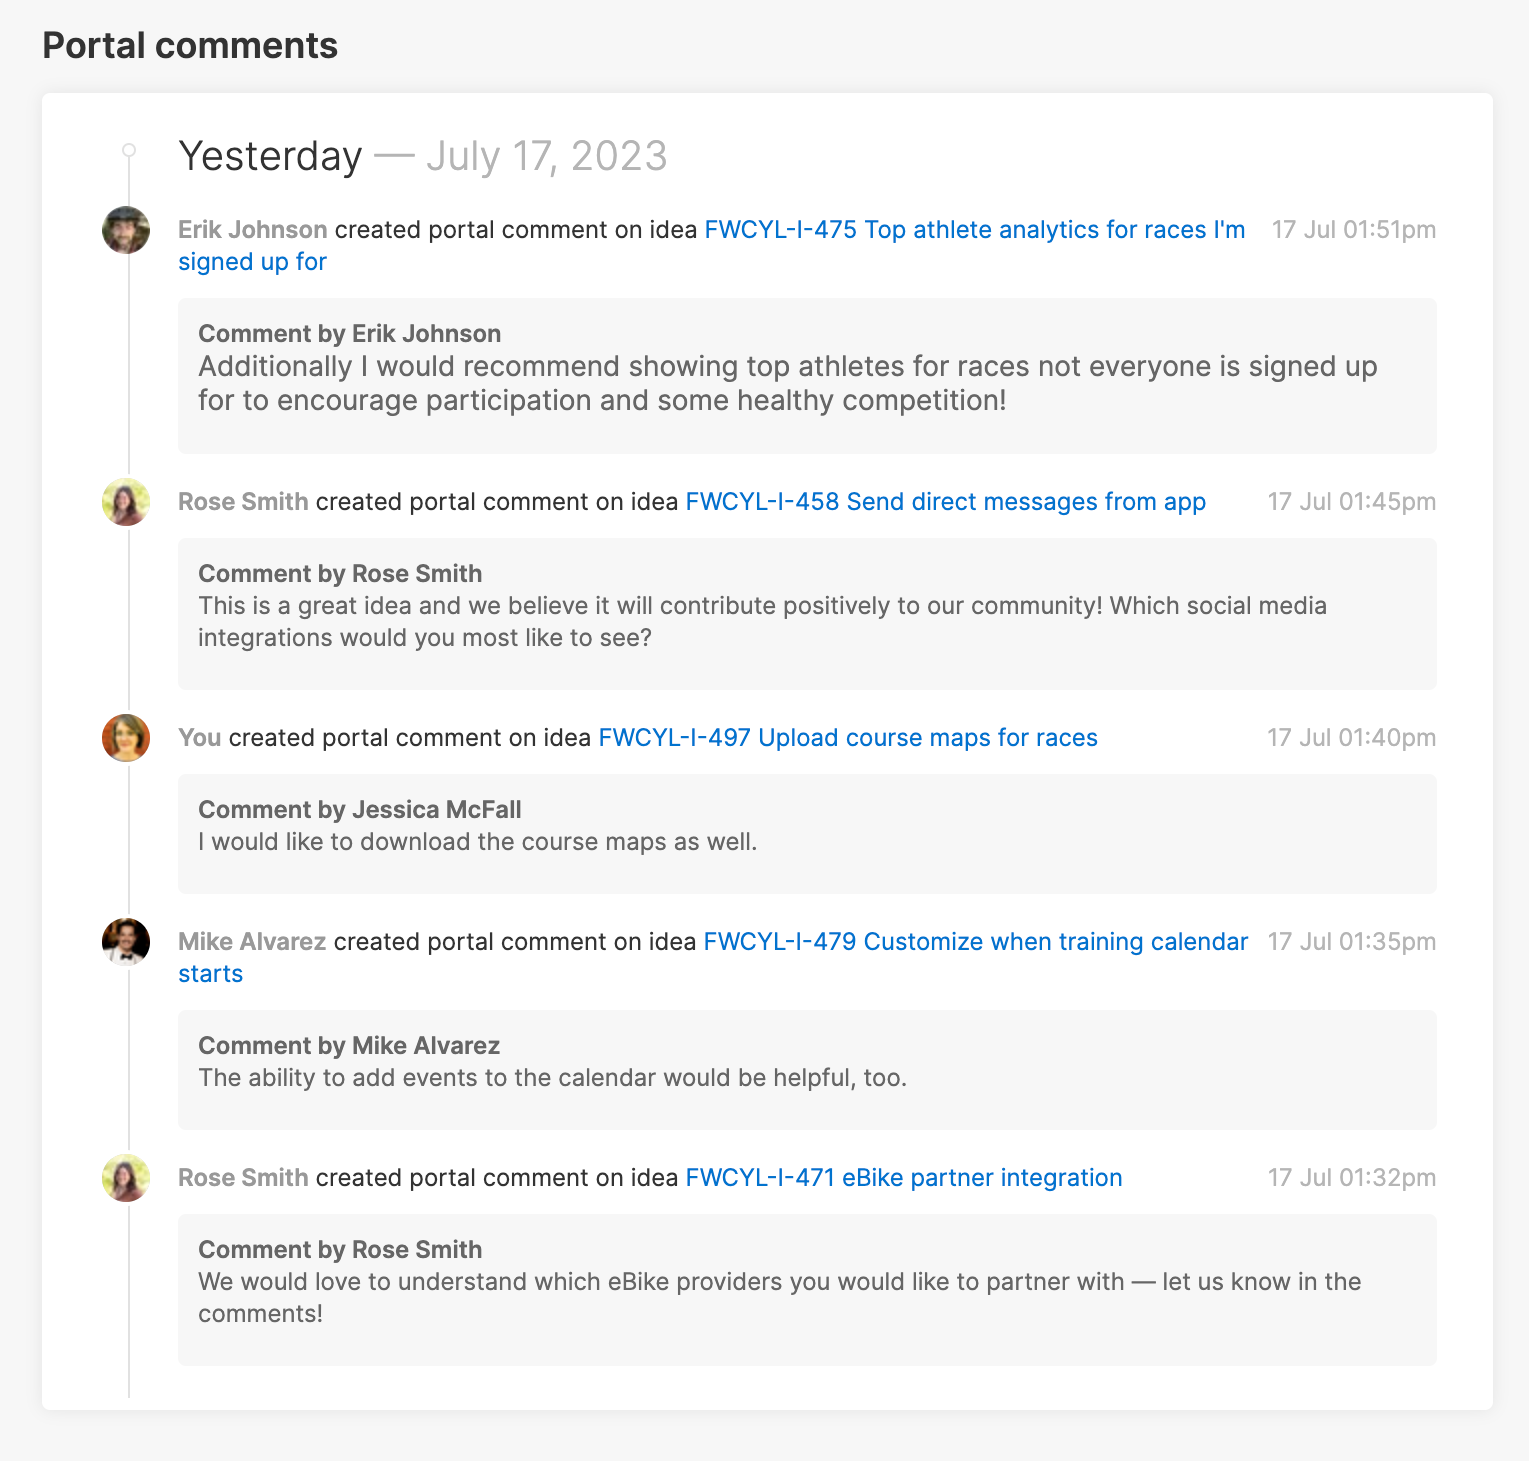 Portal comments section of ideas overview